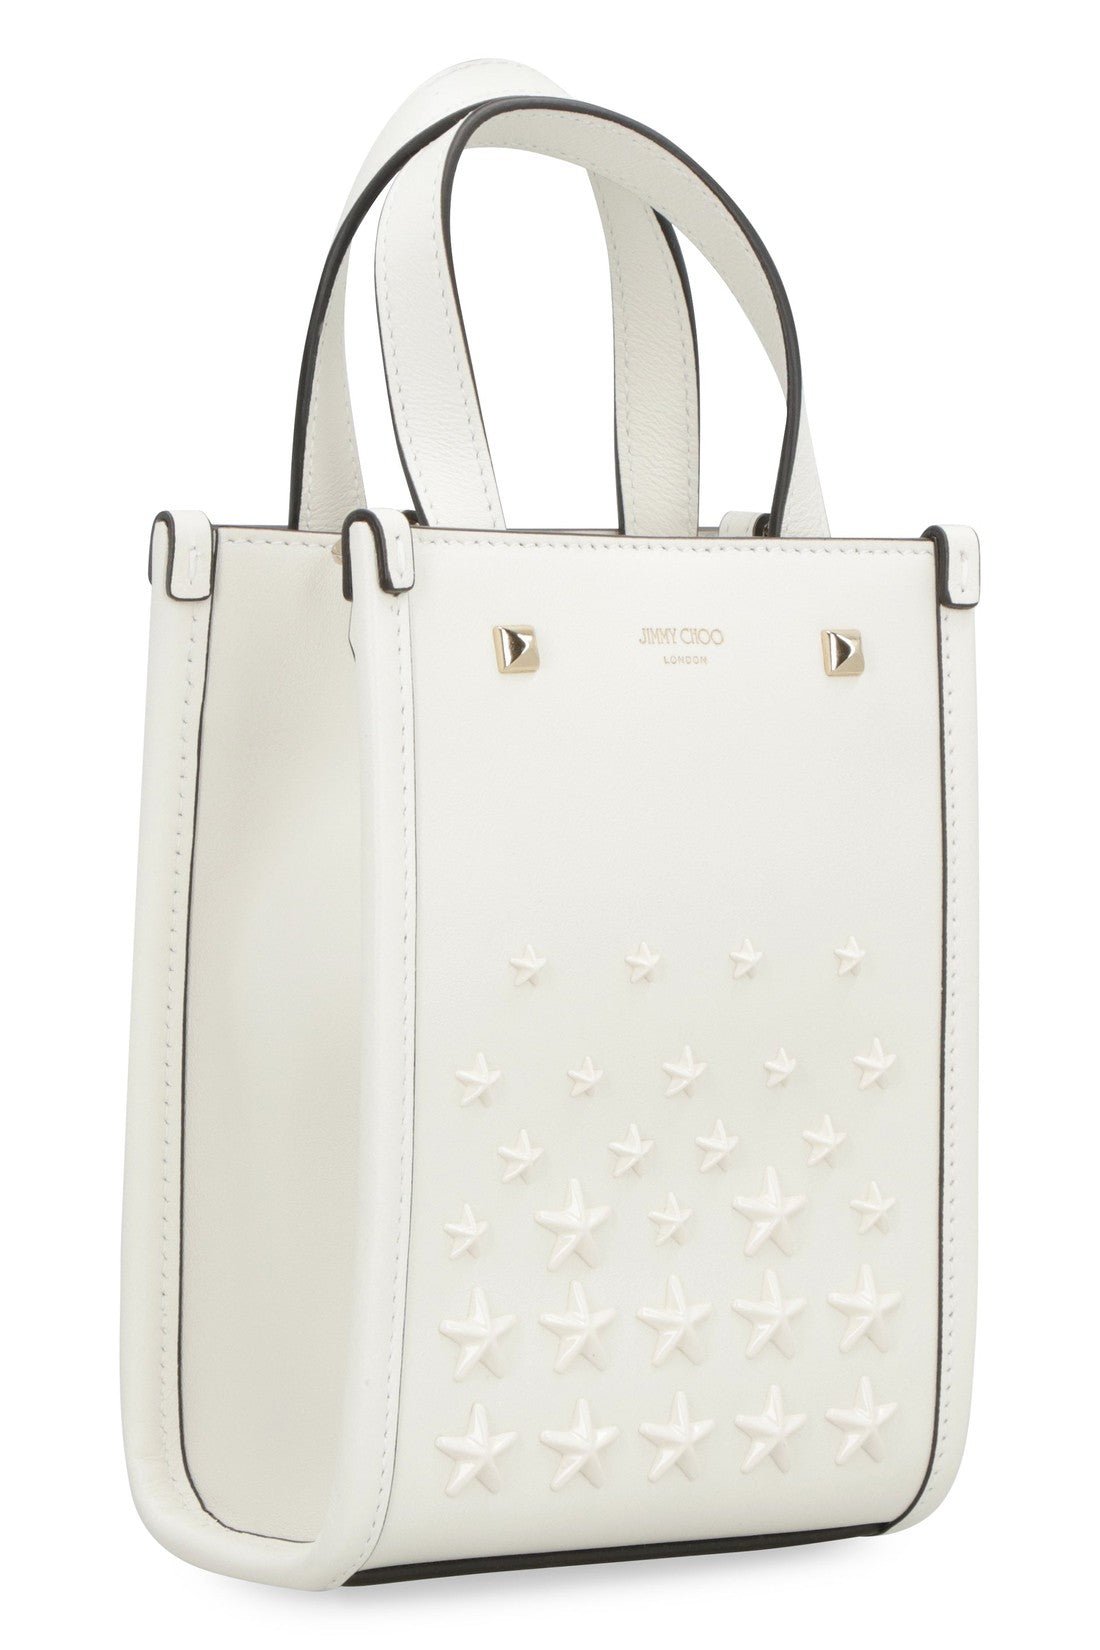 Jimmy Choo-OUTLET-SALE-Leather mini tote-ARCHIVIST